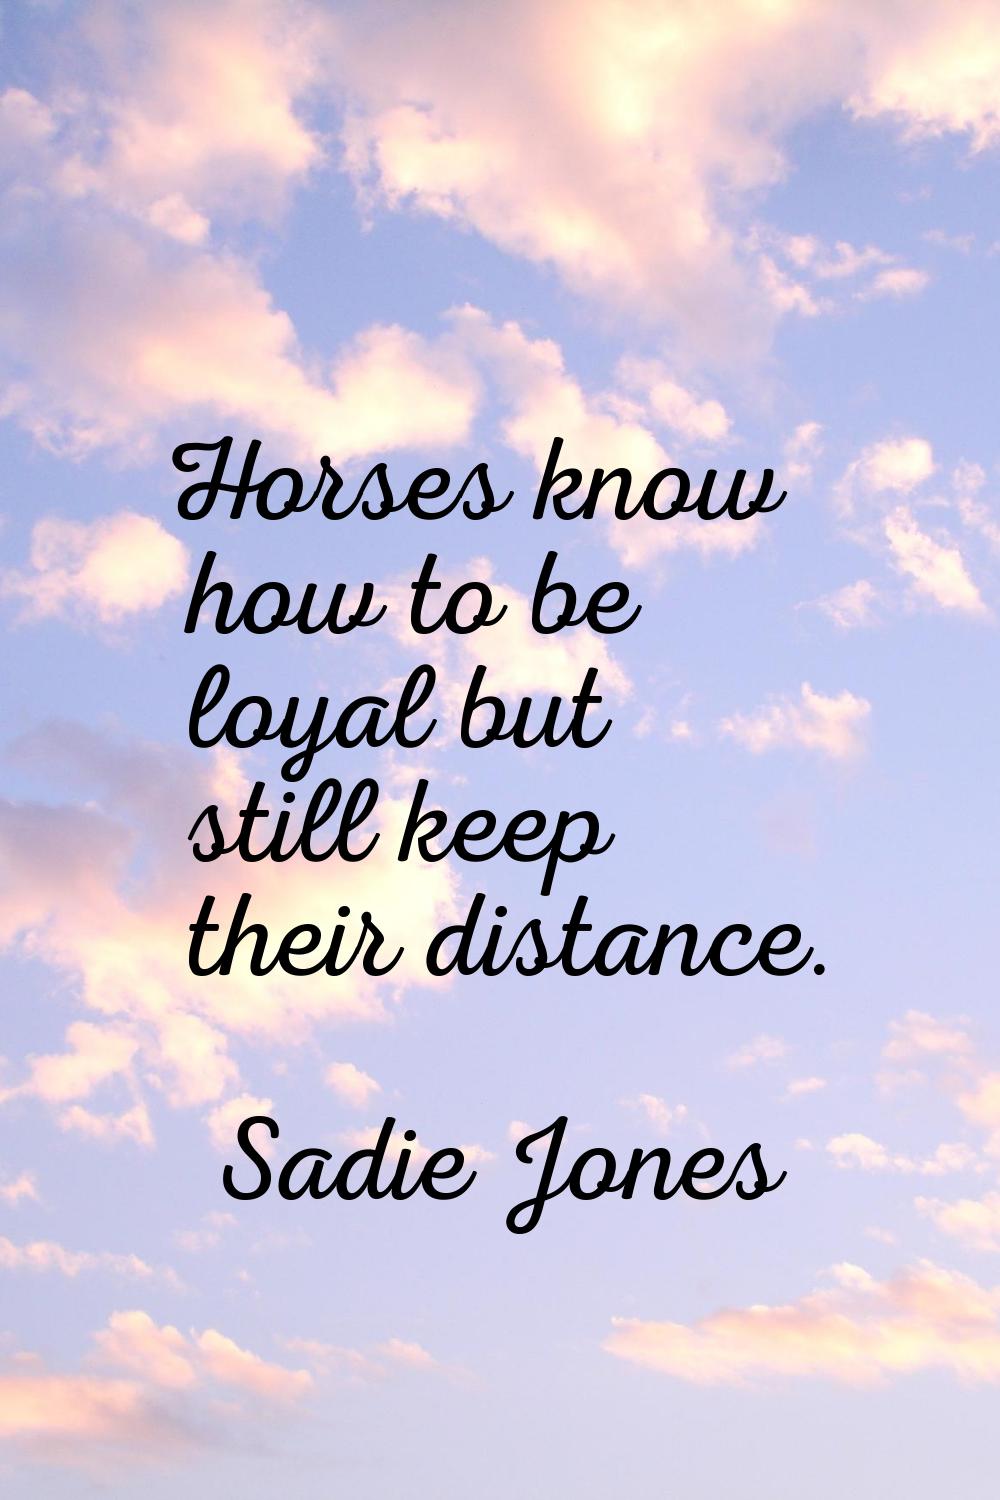 Horses know how to be loyal but still keep their distance.